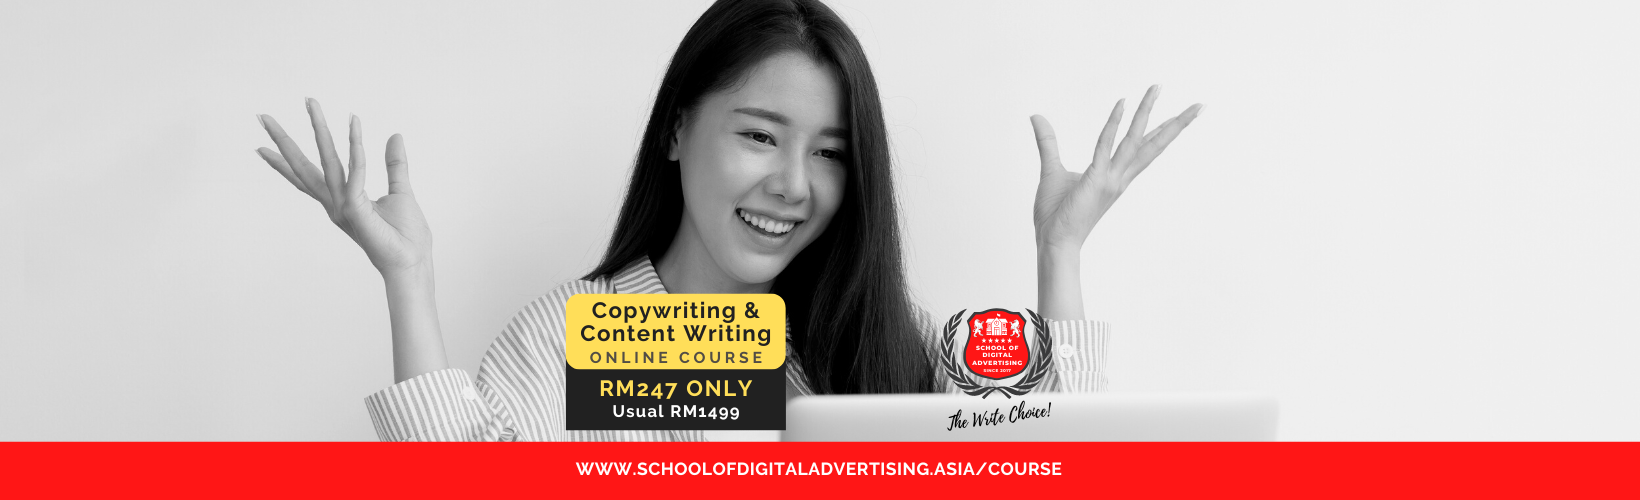 Copywriting & Content Writing Online Course Malaysia